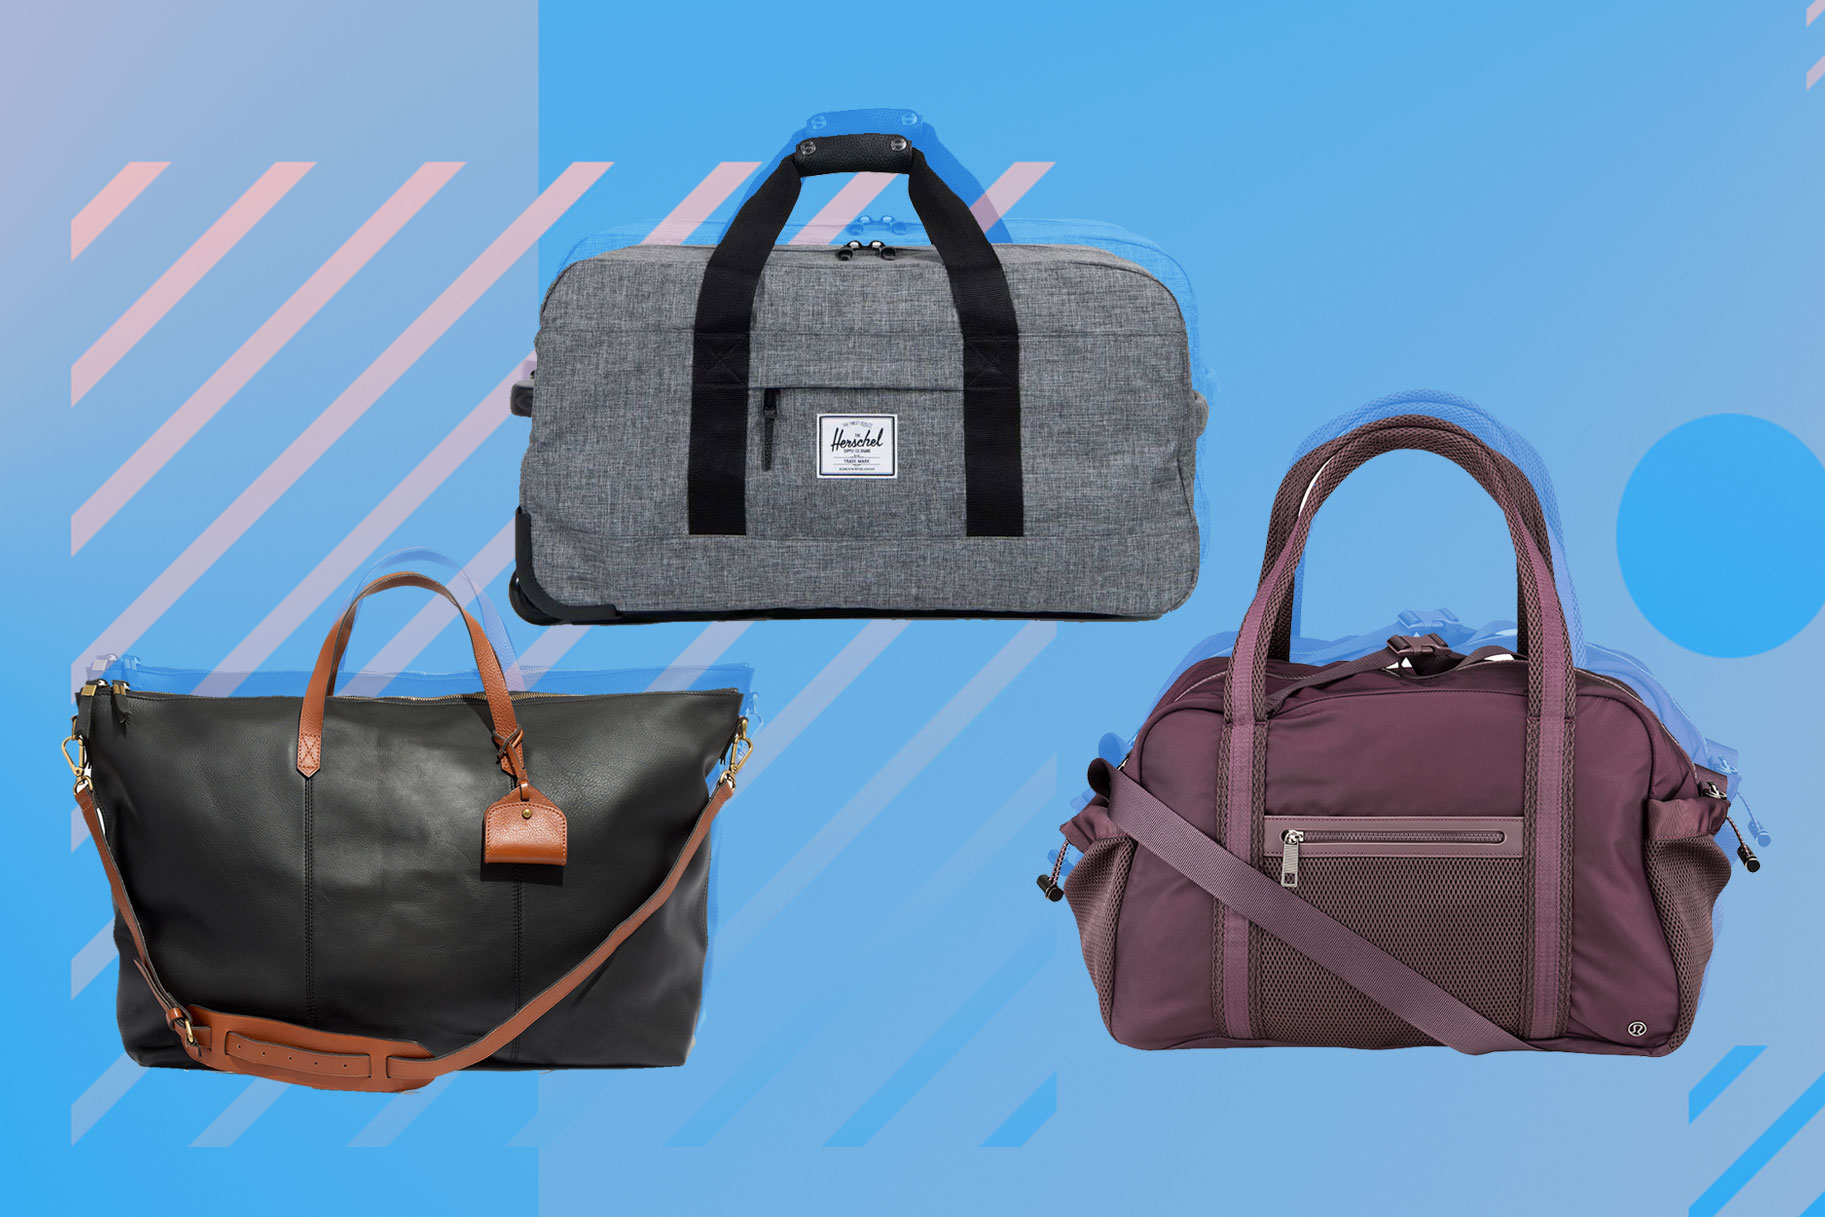 Best Weekend Bags for Getaways, Trips: Reviews | The Daily Dish